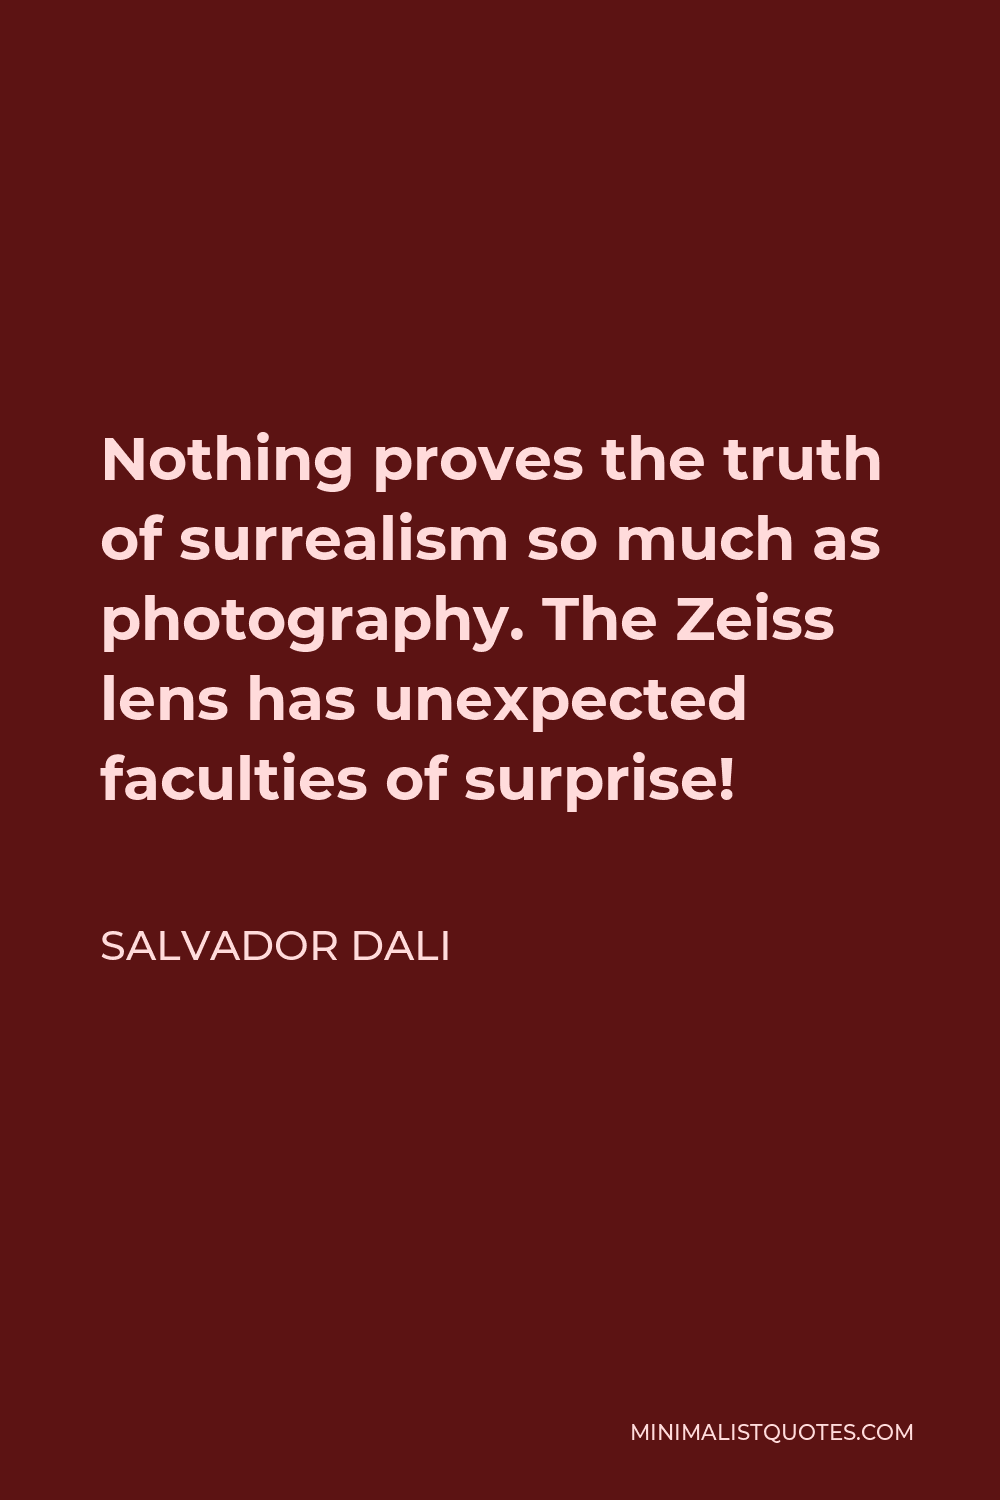 Salvador Dali Quote - Nothing proves the truth of surrealism so much as photography. The Zeiss lens has unexpected faculties of surprise!